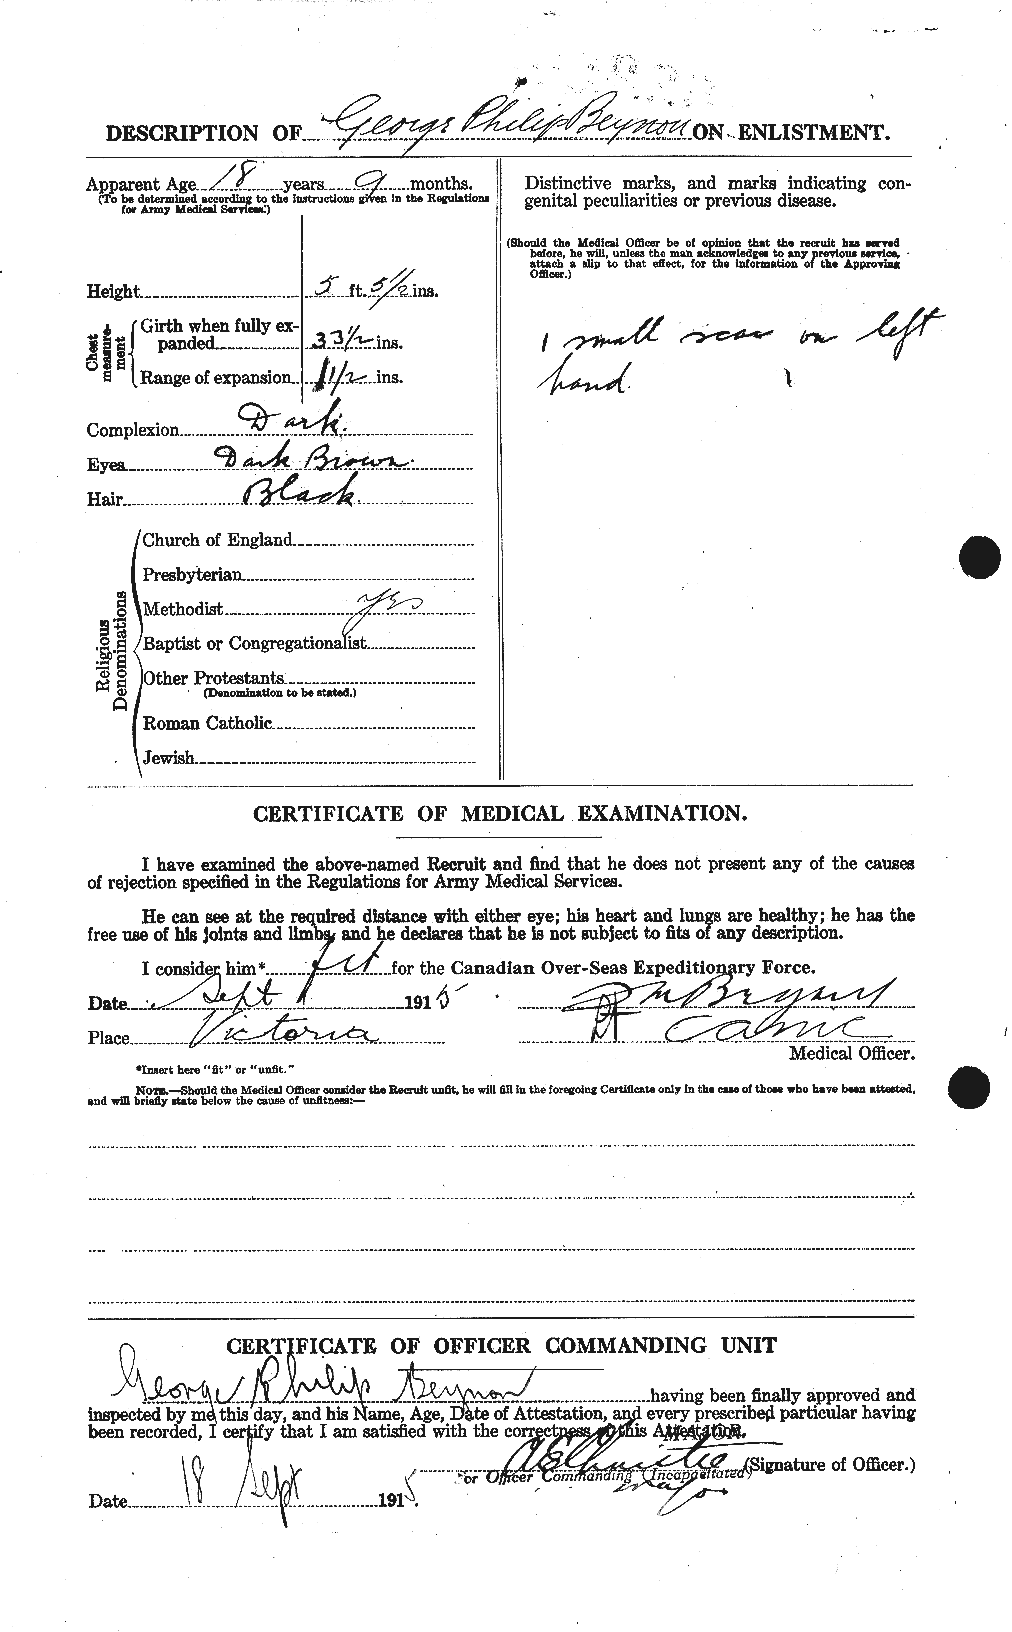 Personnel Records of the First World War - CEF 237509b